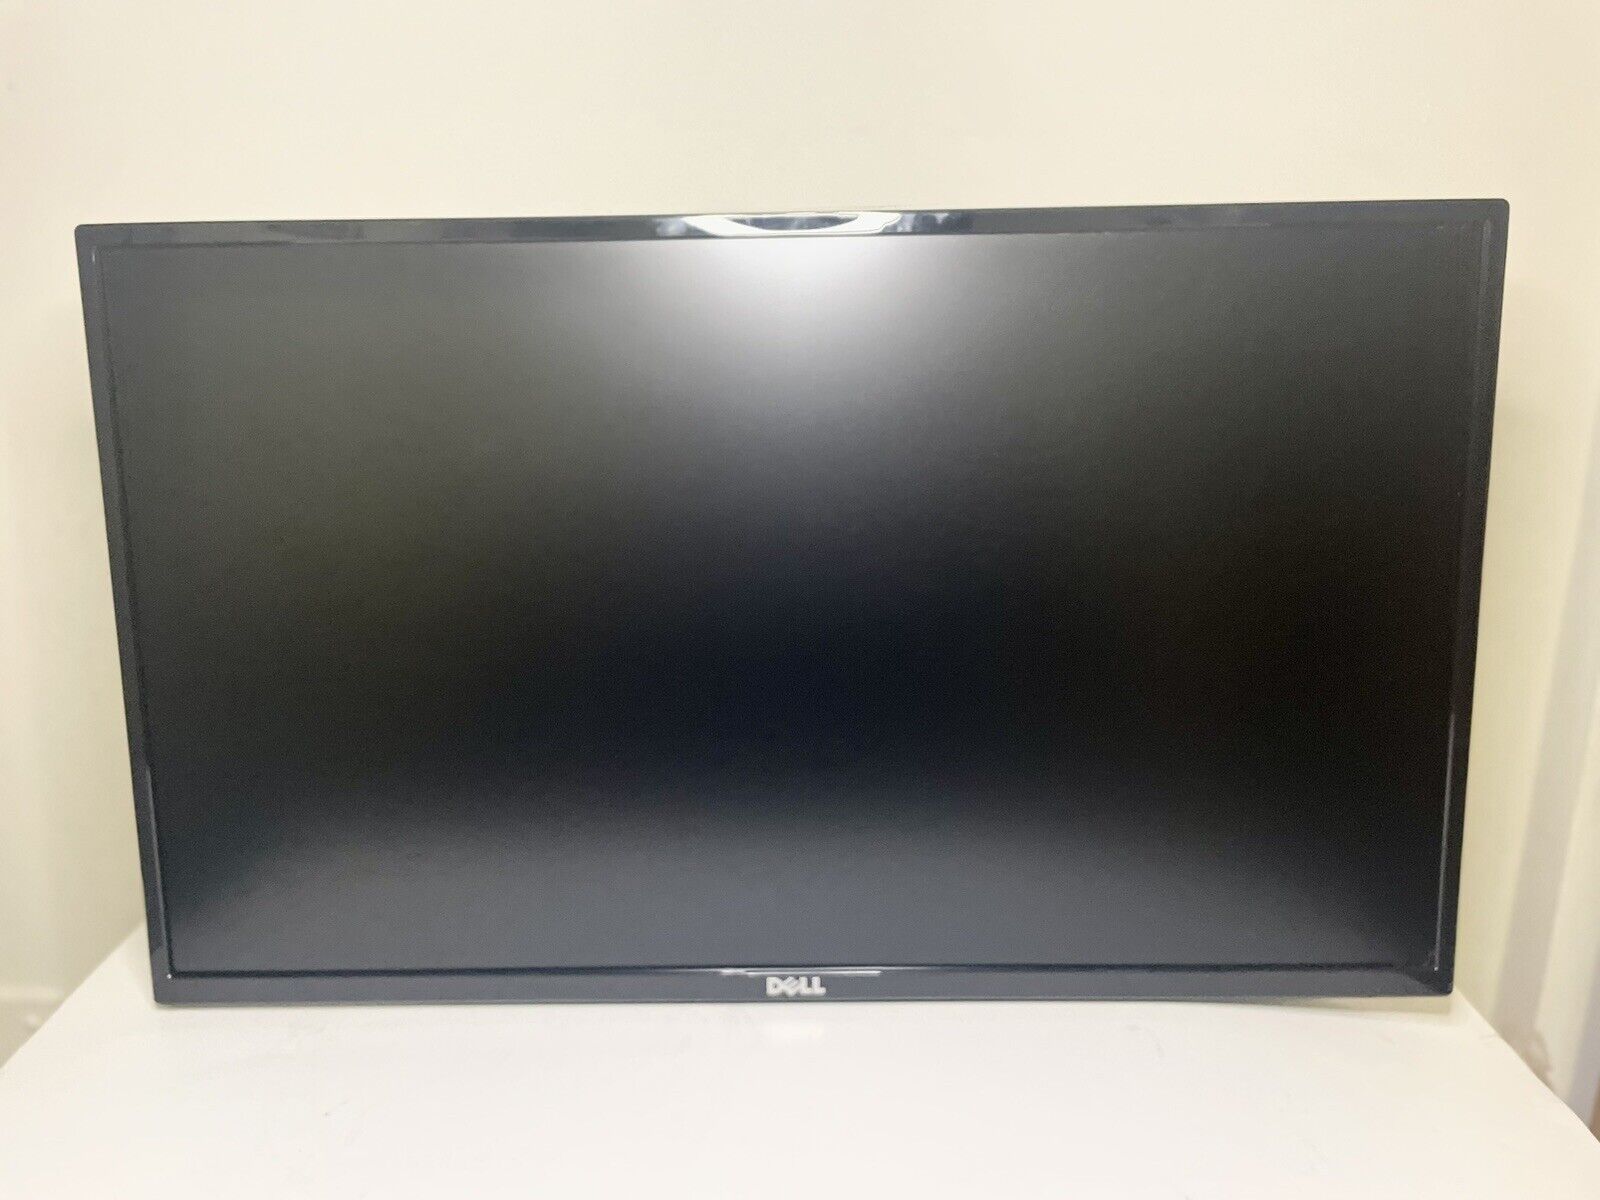 Dell 27 inch Widescreen Monitor IPS LED FHD SE2717HR - No Stand - w/ Power cord